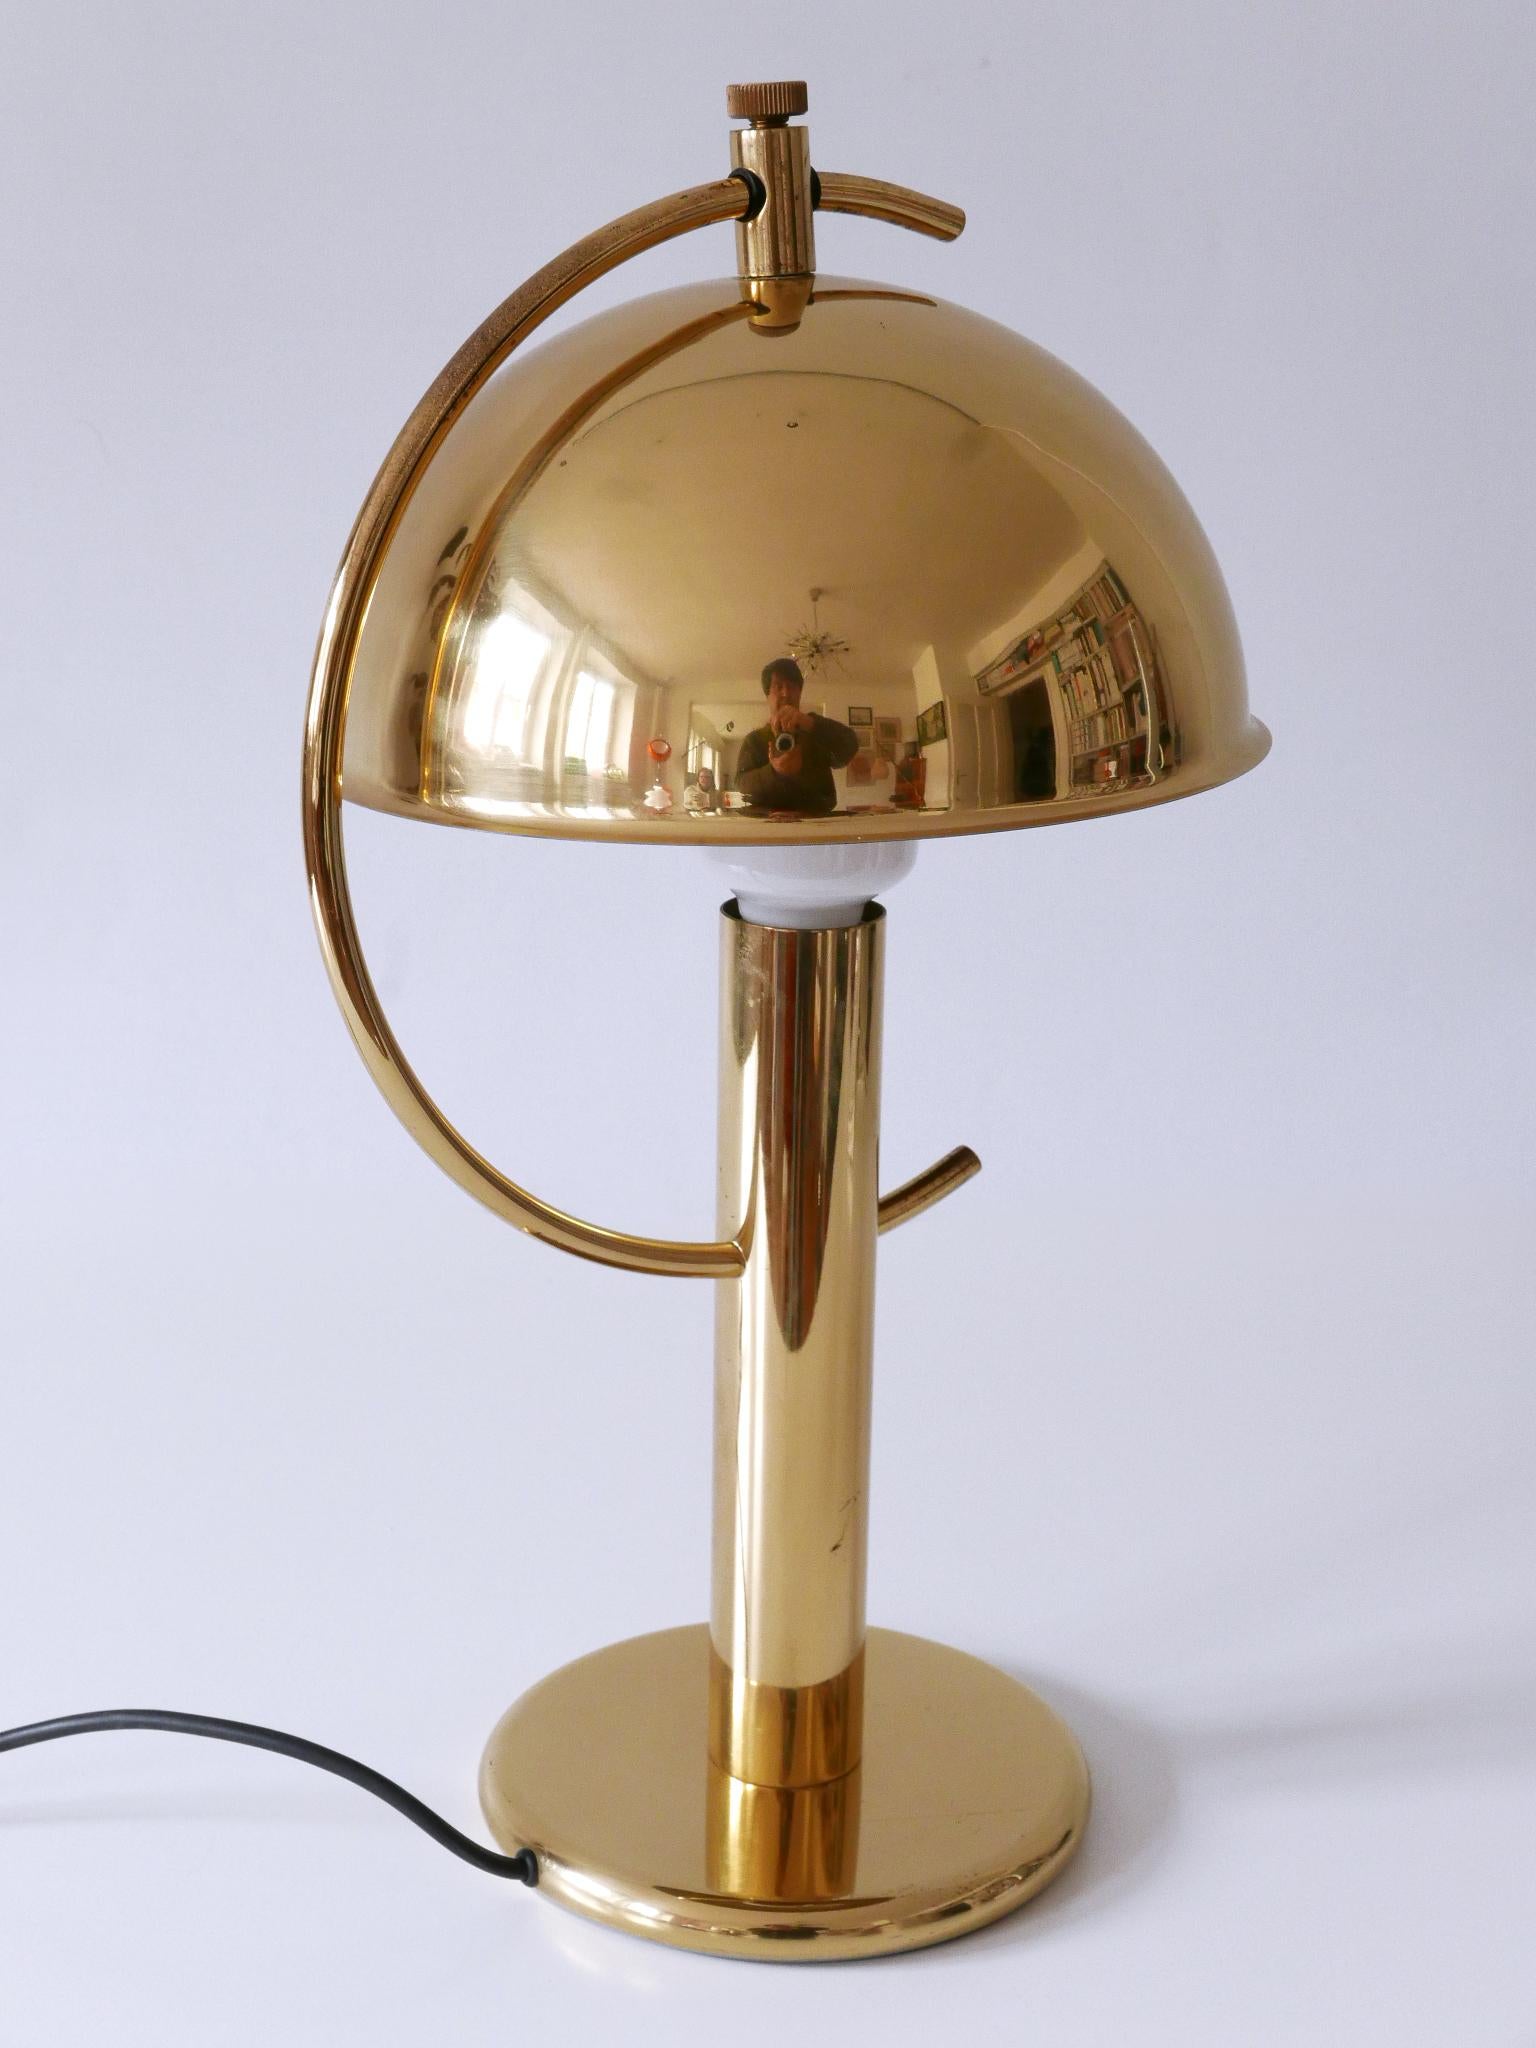 Exceptional Mid-Century Modern Brass Table Lamp by Gebrüder Cosack Germany 1960s For Sale 2